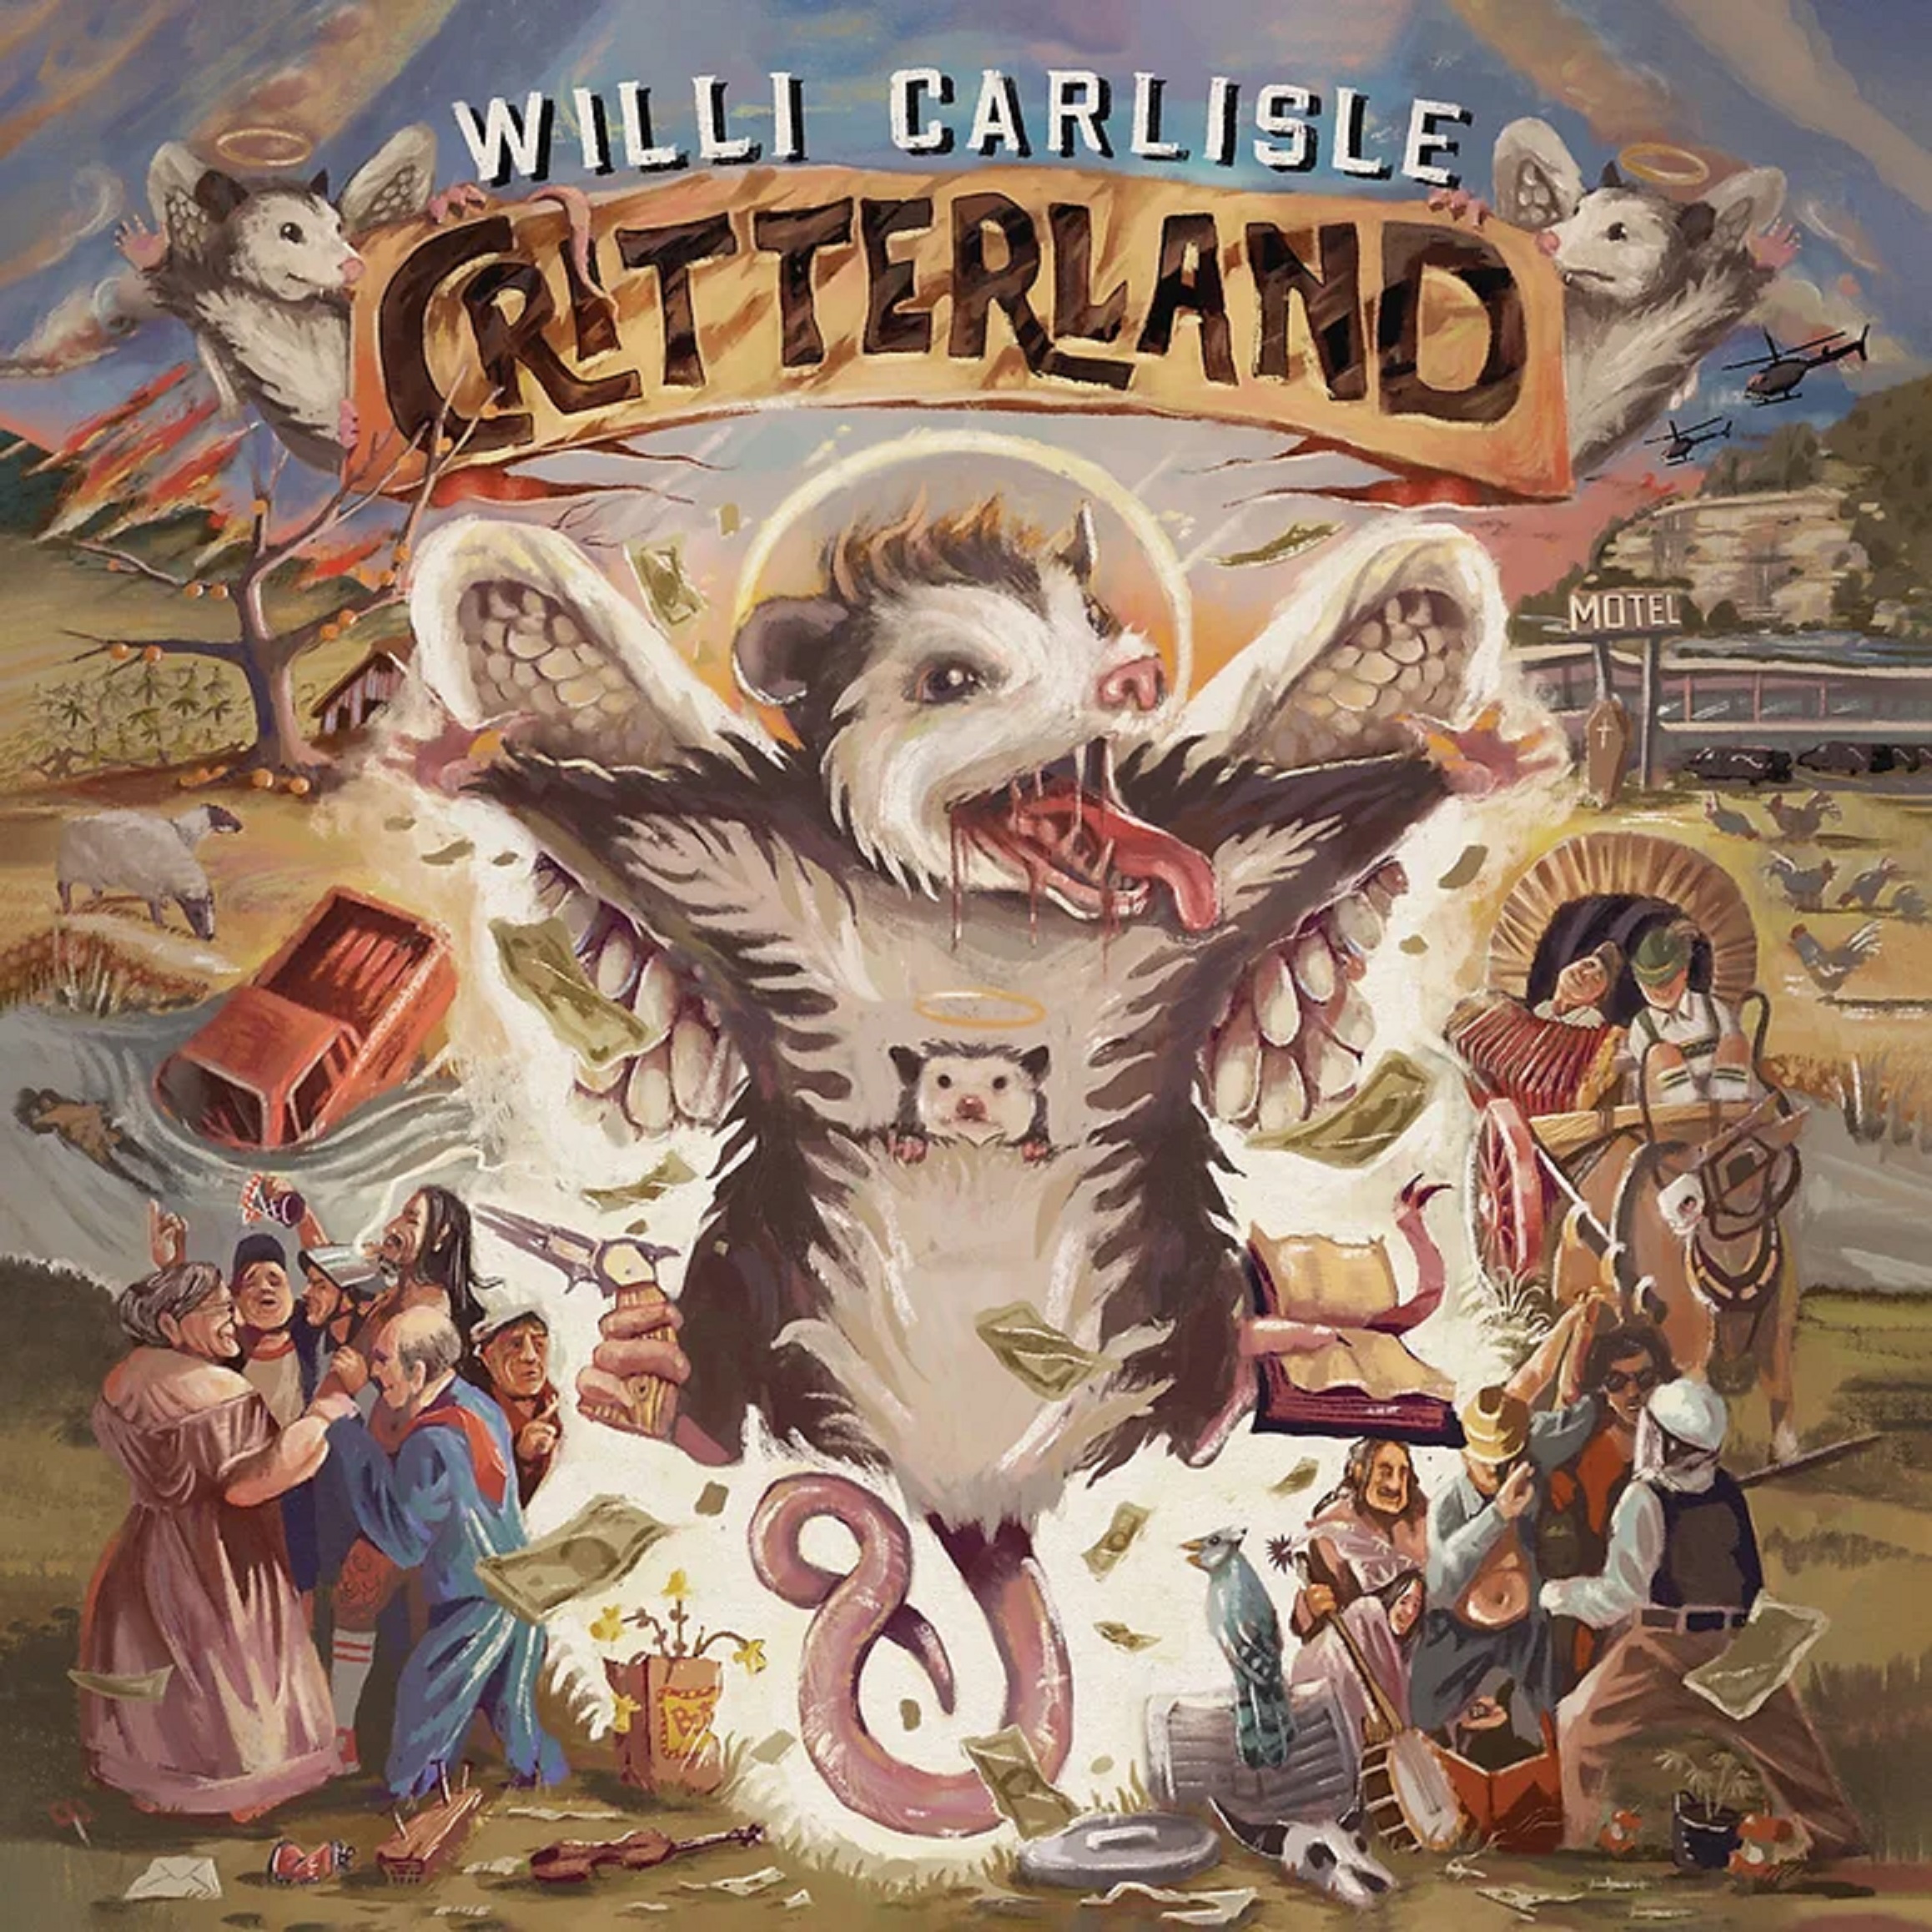 Willi Carlisle’s Critterland Is A Stunning Observation On The Beauty, Pain, And Redemption Found In All Corners Of Humanity